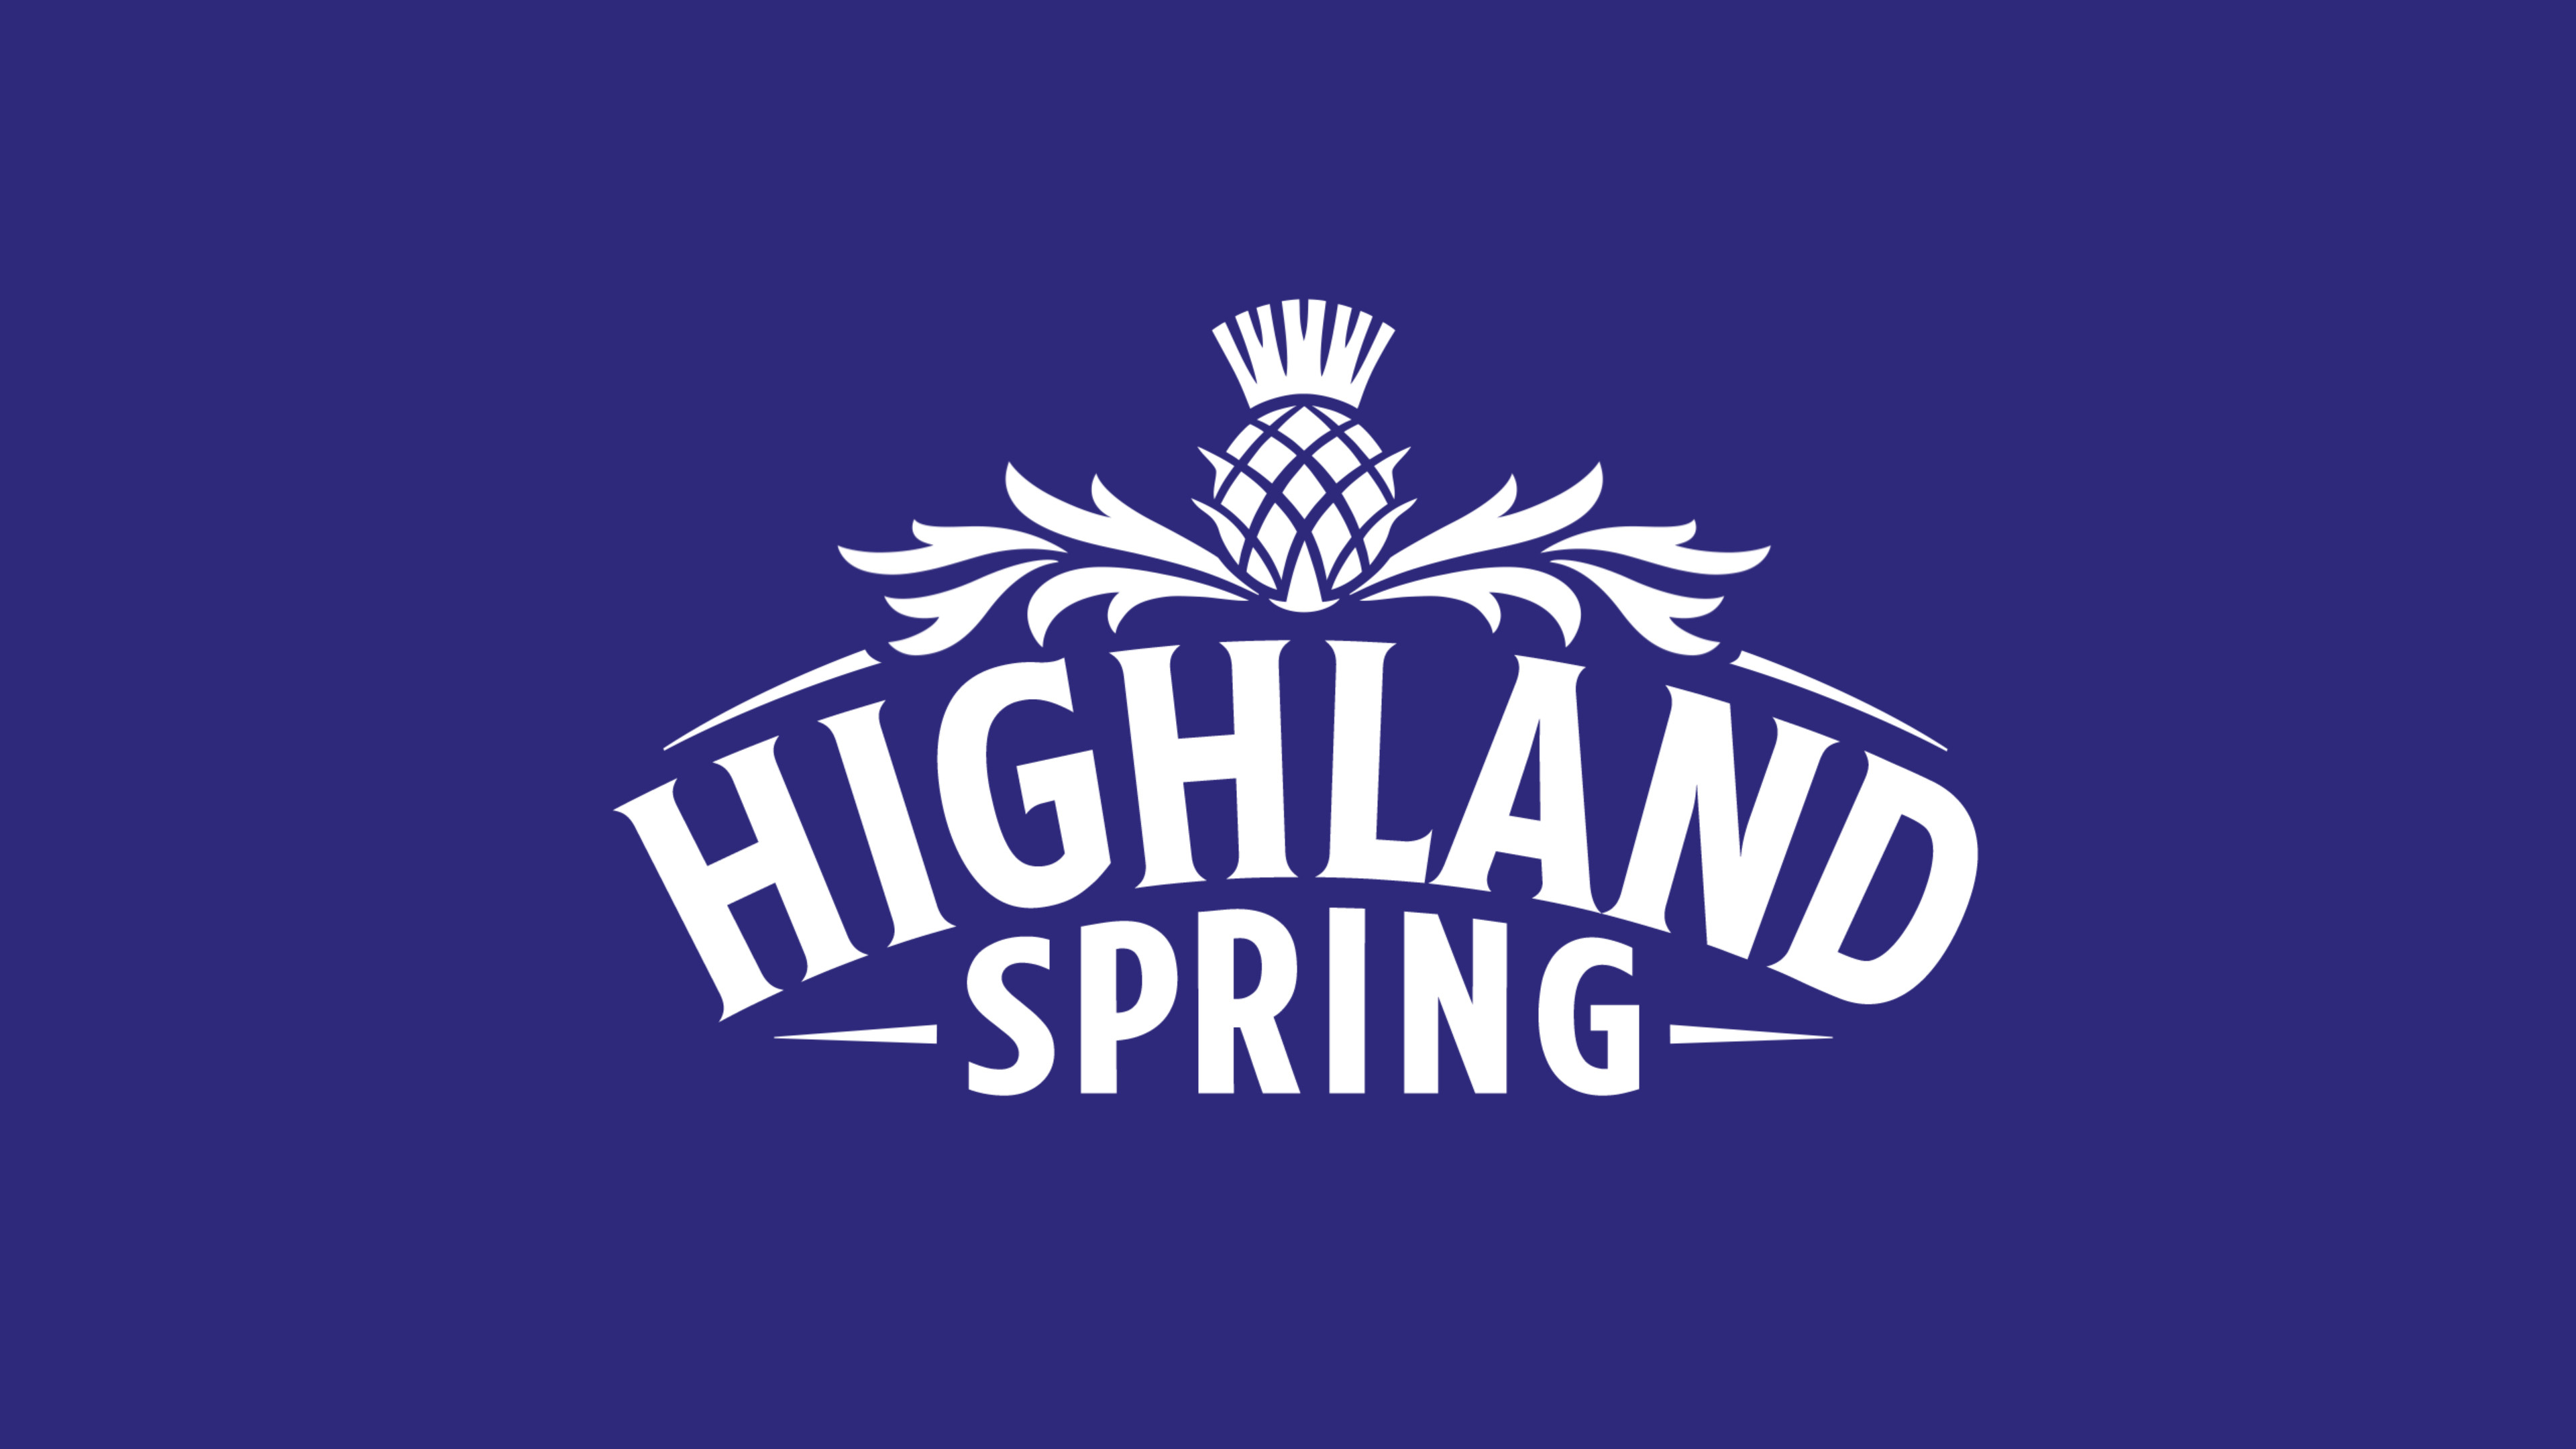 20-facts-about-highland-spring